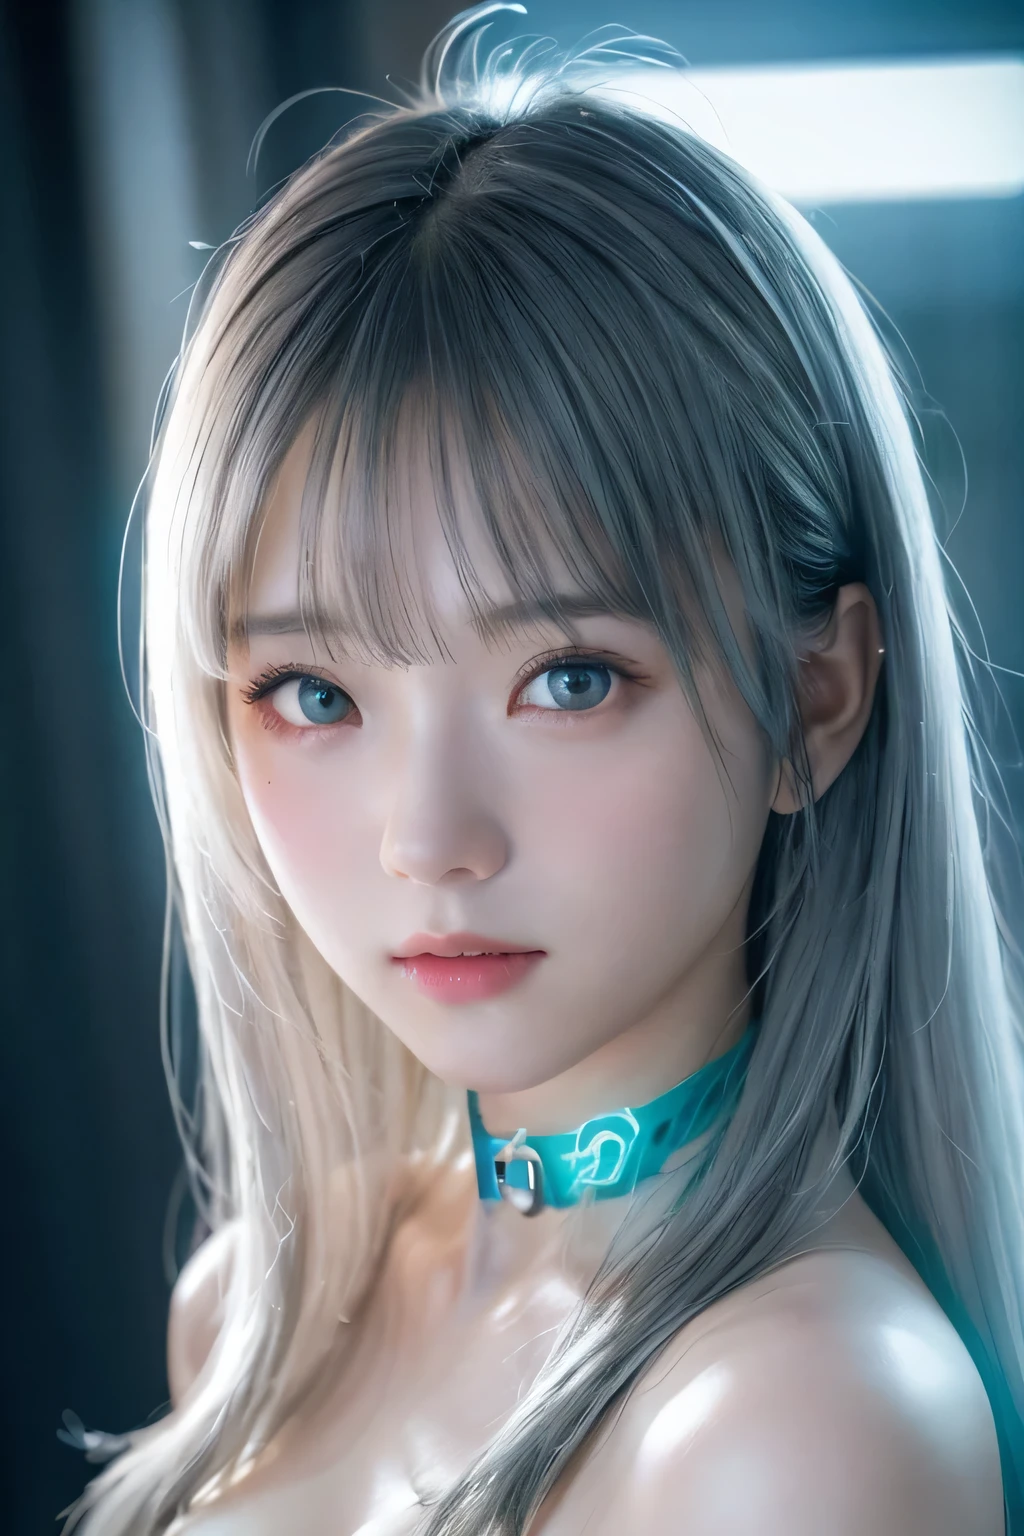 highest quality、8K masterpiece、超A high resolution、(Photoreal:1.3)、Raw photo、1 girl、silvery hair、glowing skin、1 Cyberpunk Super Beautiful Soldier、((Ultra realistic details))、Portrait、global illumination、Shadow、octane rendering、8K、super sharp、、、Metal、cold color、、very intricate details、realistic light、CGSoation trend beautiful eyes、Eyes shining towards the camera、neon details、12 year old girl、Shining turquoise eyes、、turned into slime、flat body、choker